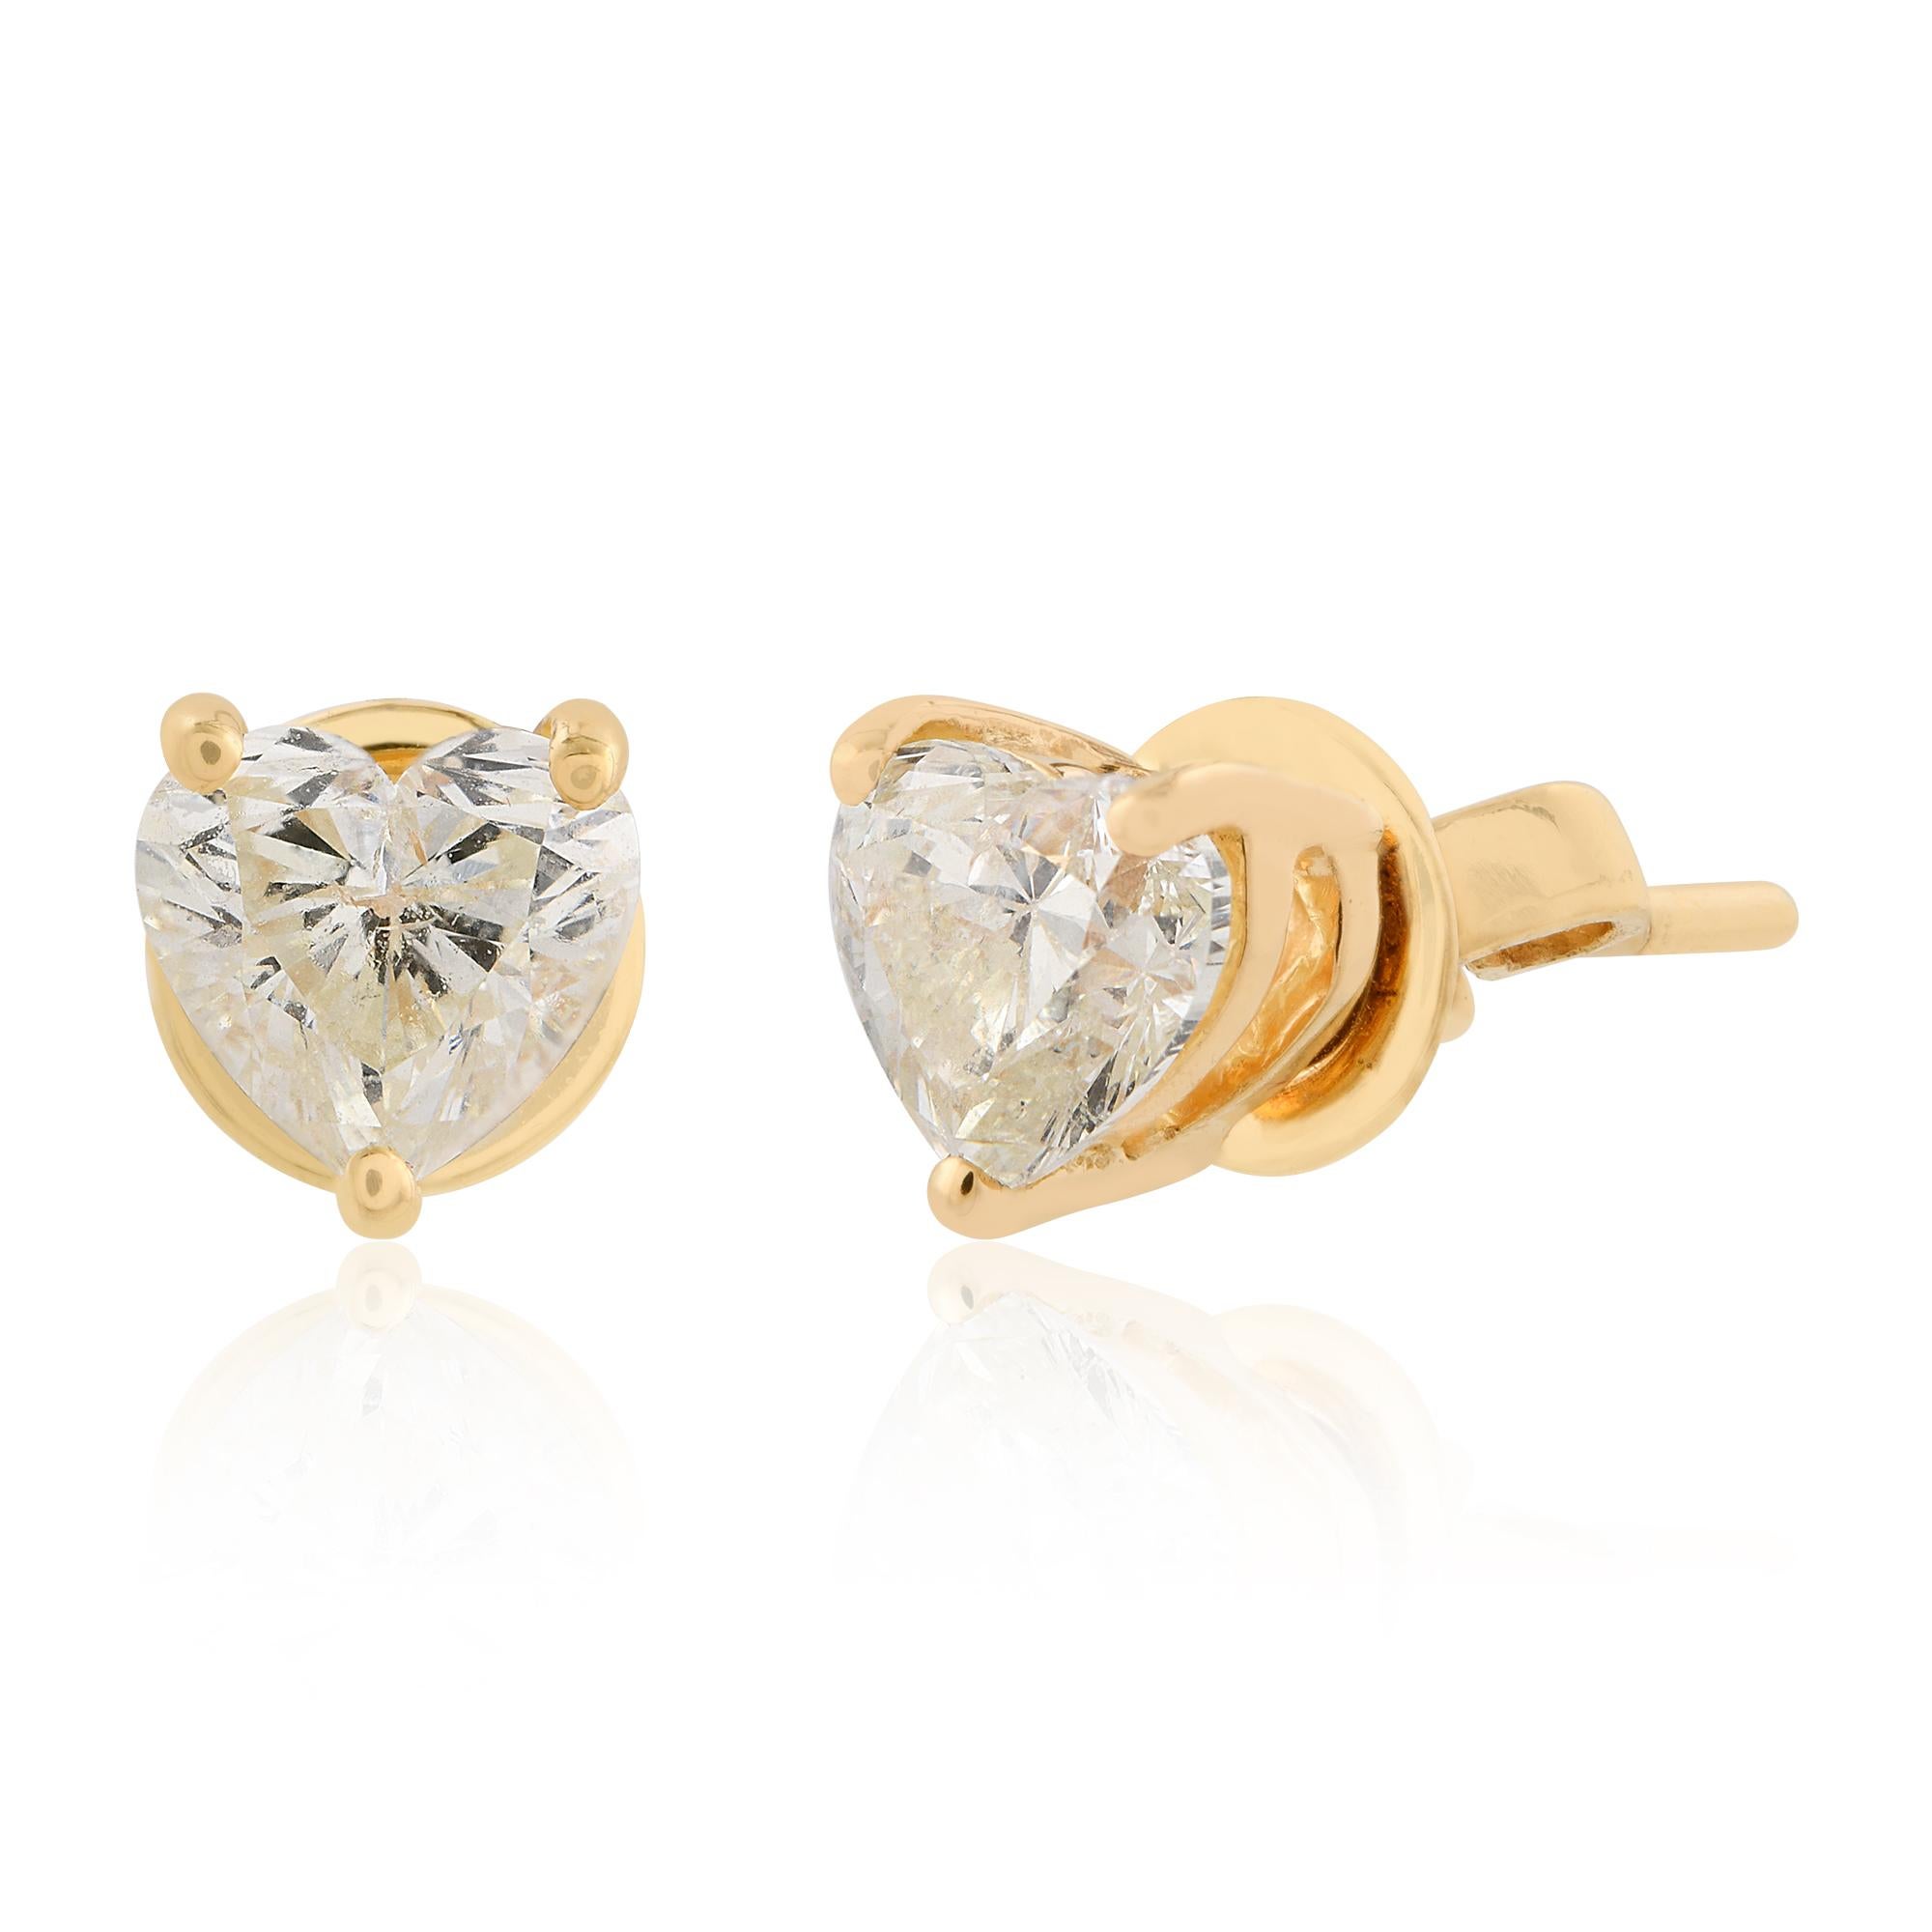 Item Code :- SEE-11488(14k)
Gross Wt. :- 1.37 gm
Solid 14k Yellow Gold Wt. :- 1.17 gm
Diamond Wt. :- 1.01 Ct. ( AVERAGE DIAMOND CLARITY SI1-SI2 & COLOR H-I )
Earrings Size :- 5 mm approx.

✦ Sizing
.....................
We can adjust most items to